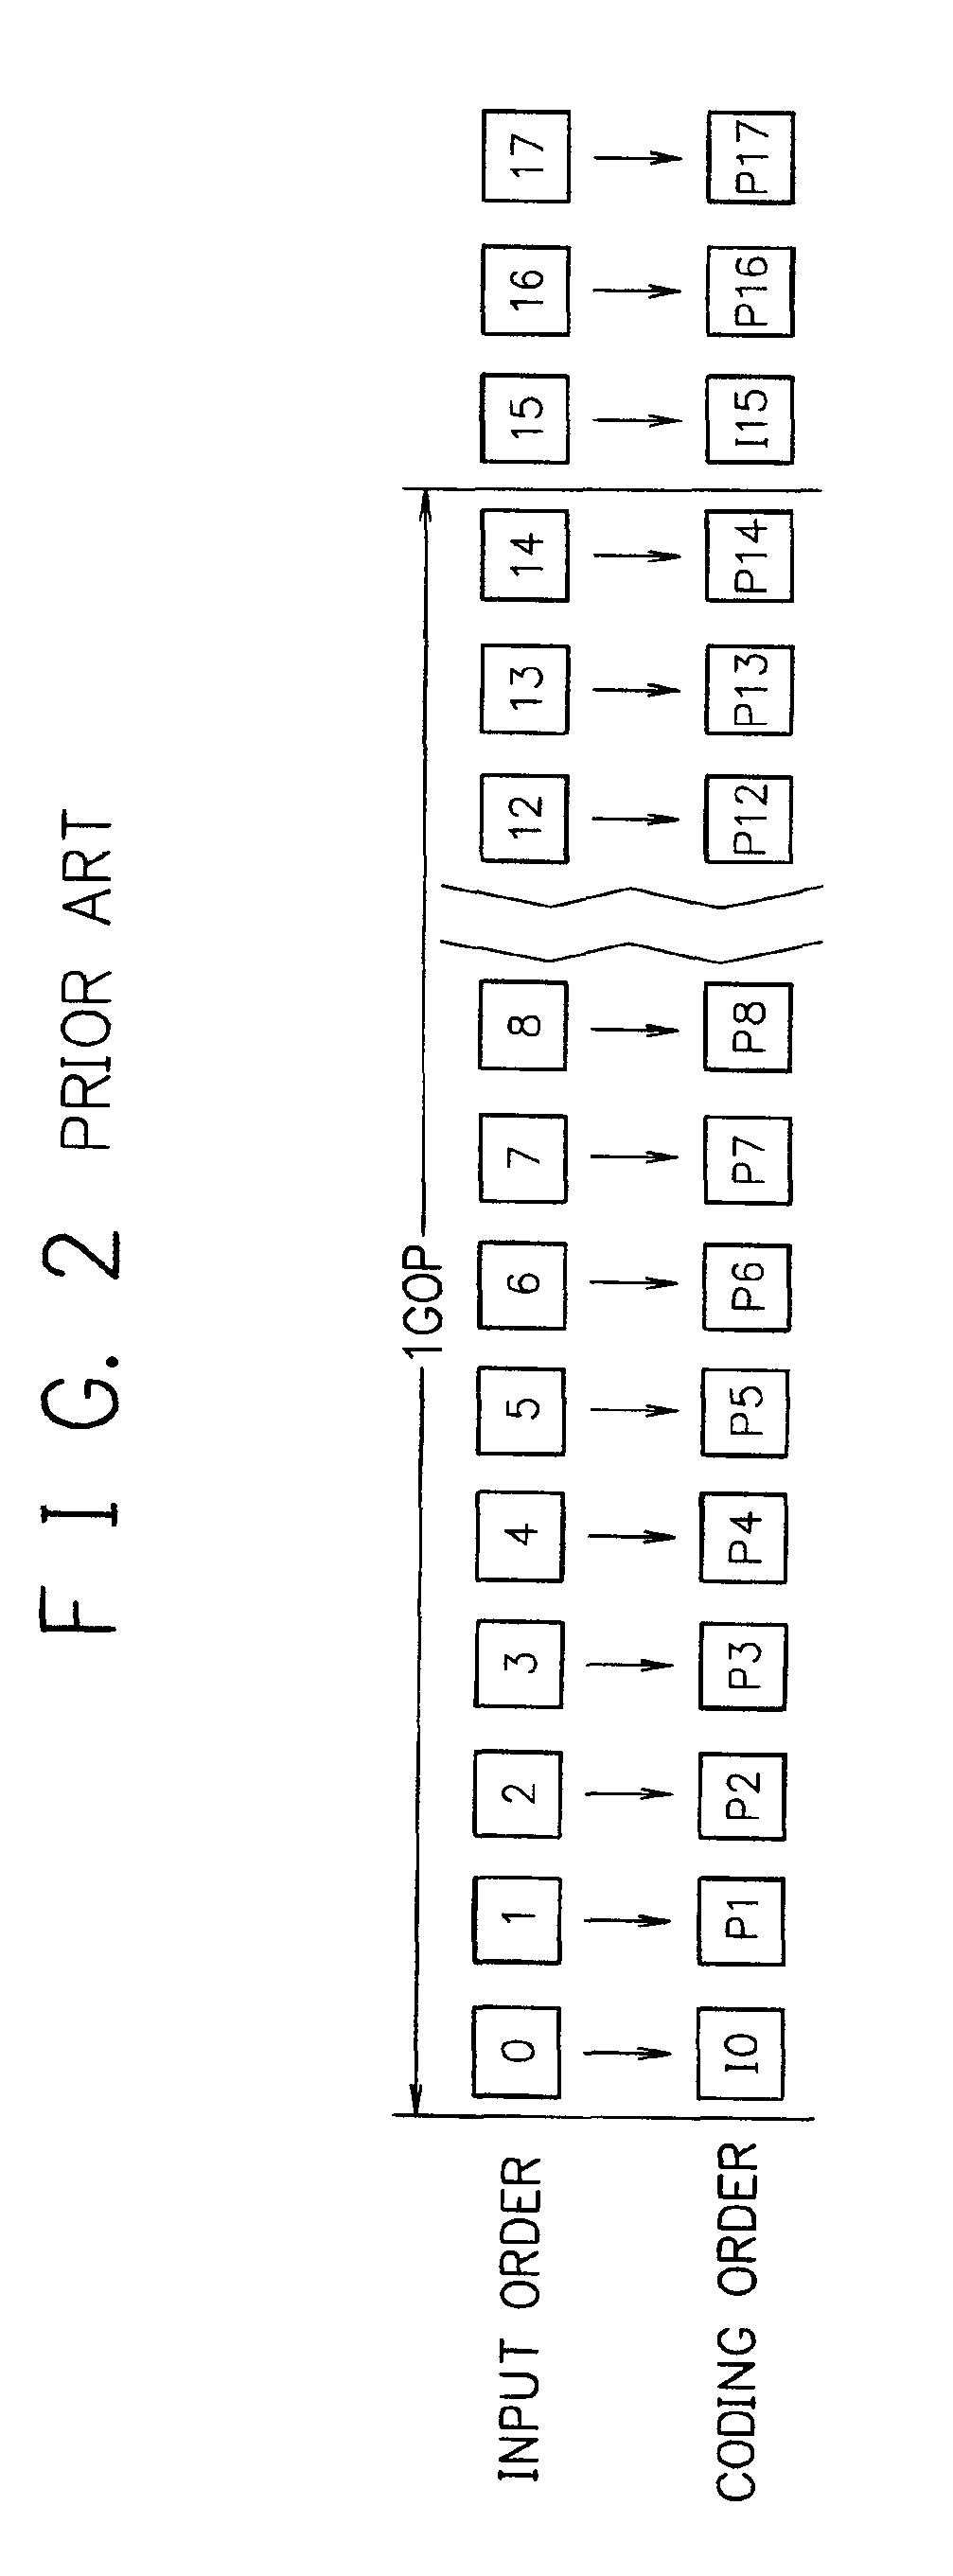 Compressed image data reproducing apparatus and method thereof